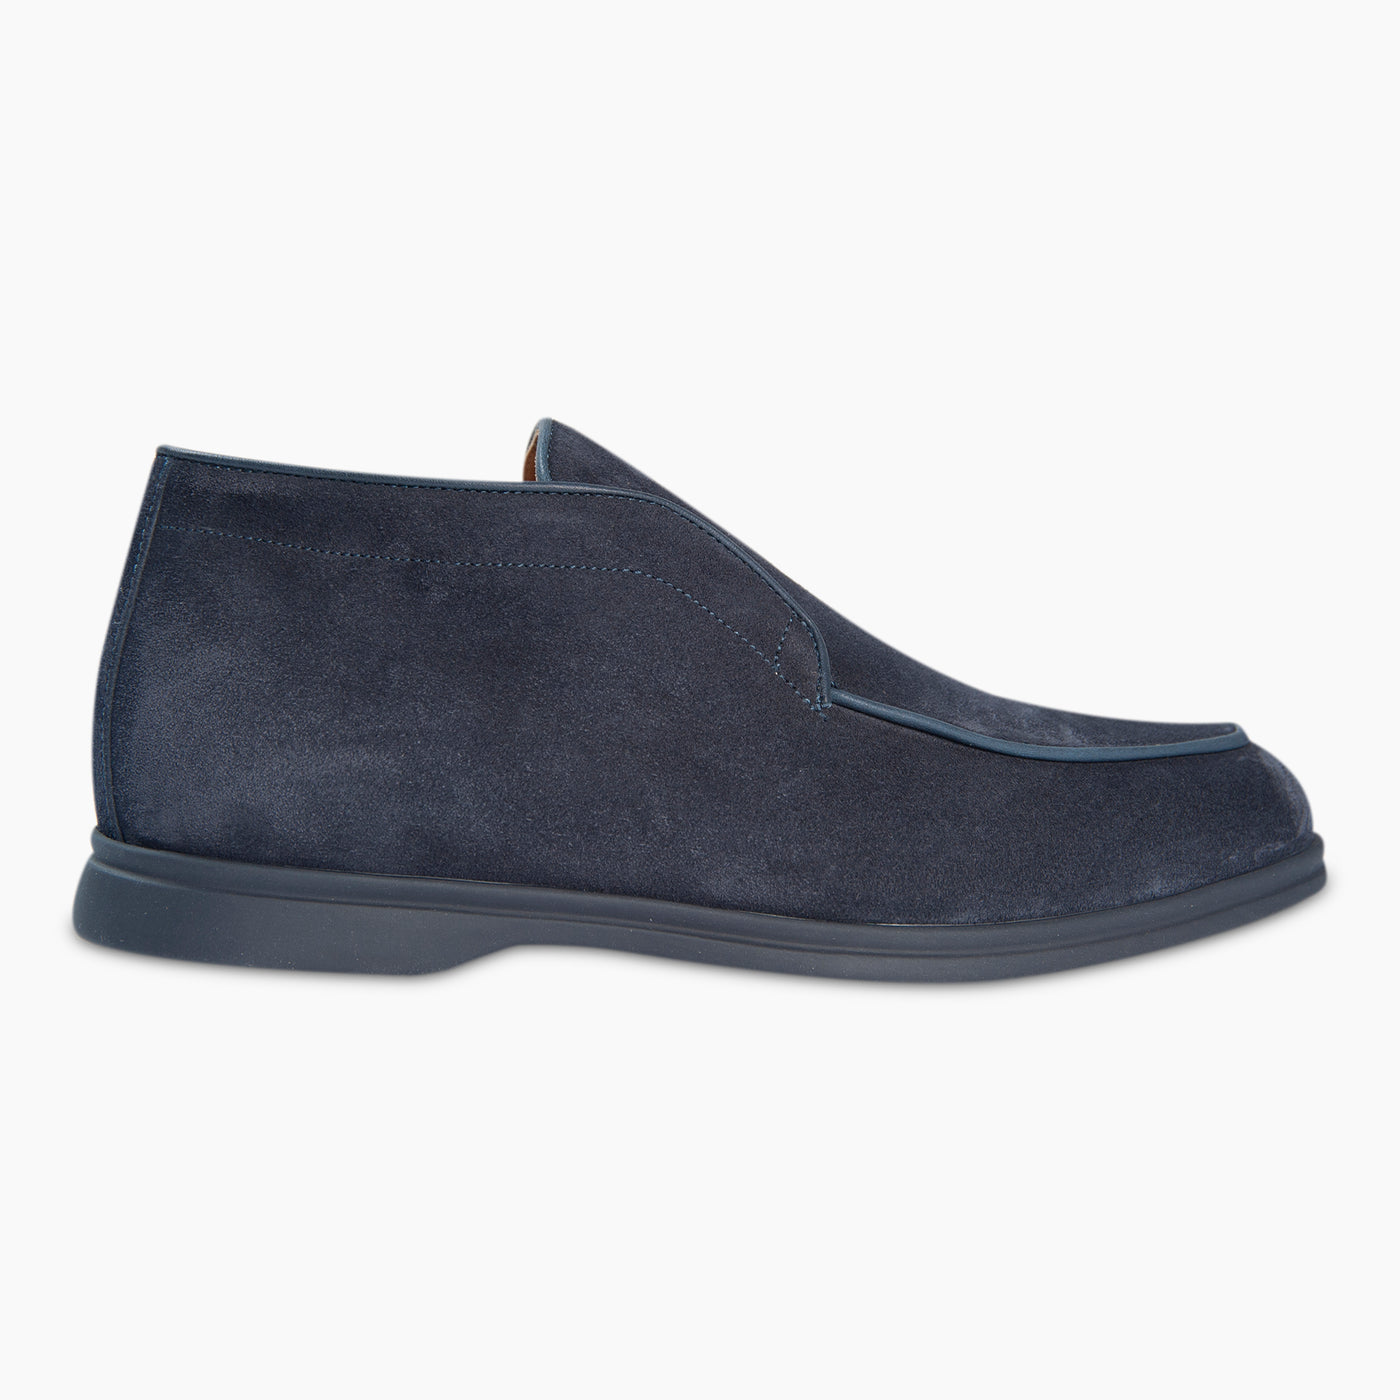 Freeman mid ankle boots in suede